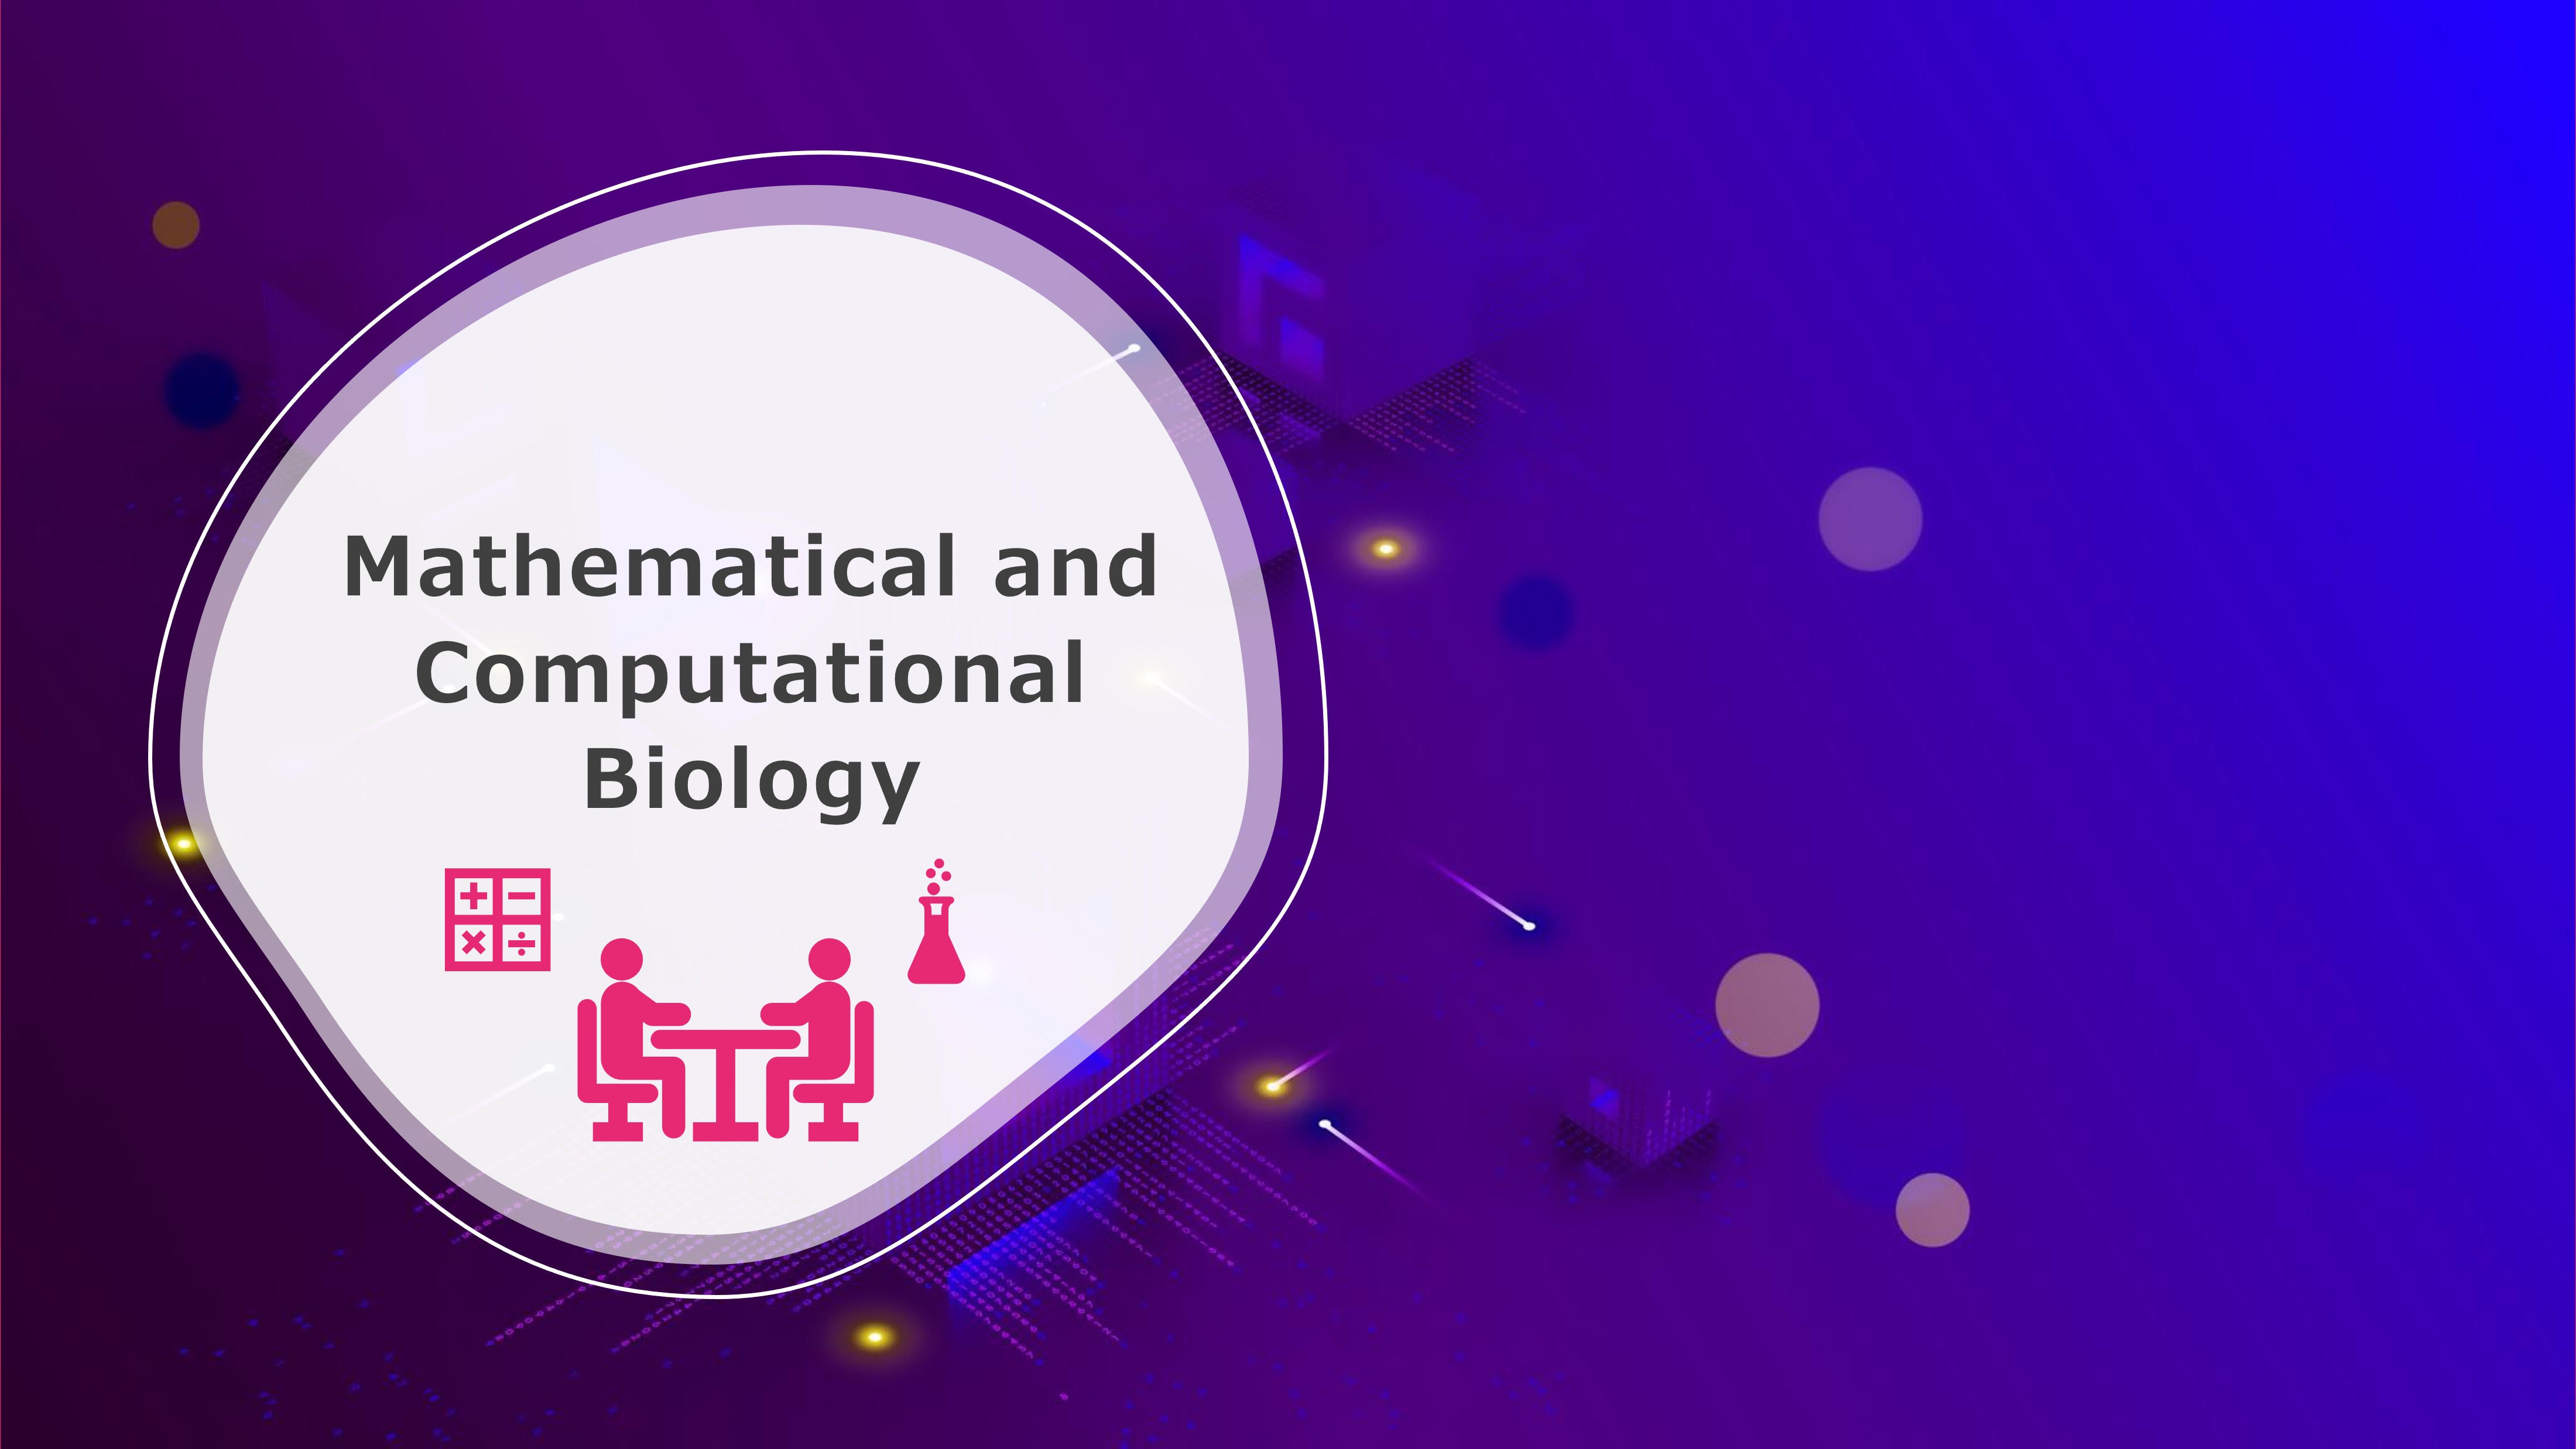 Image for "Mathematical and Computational Biology"